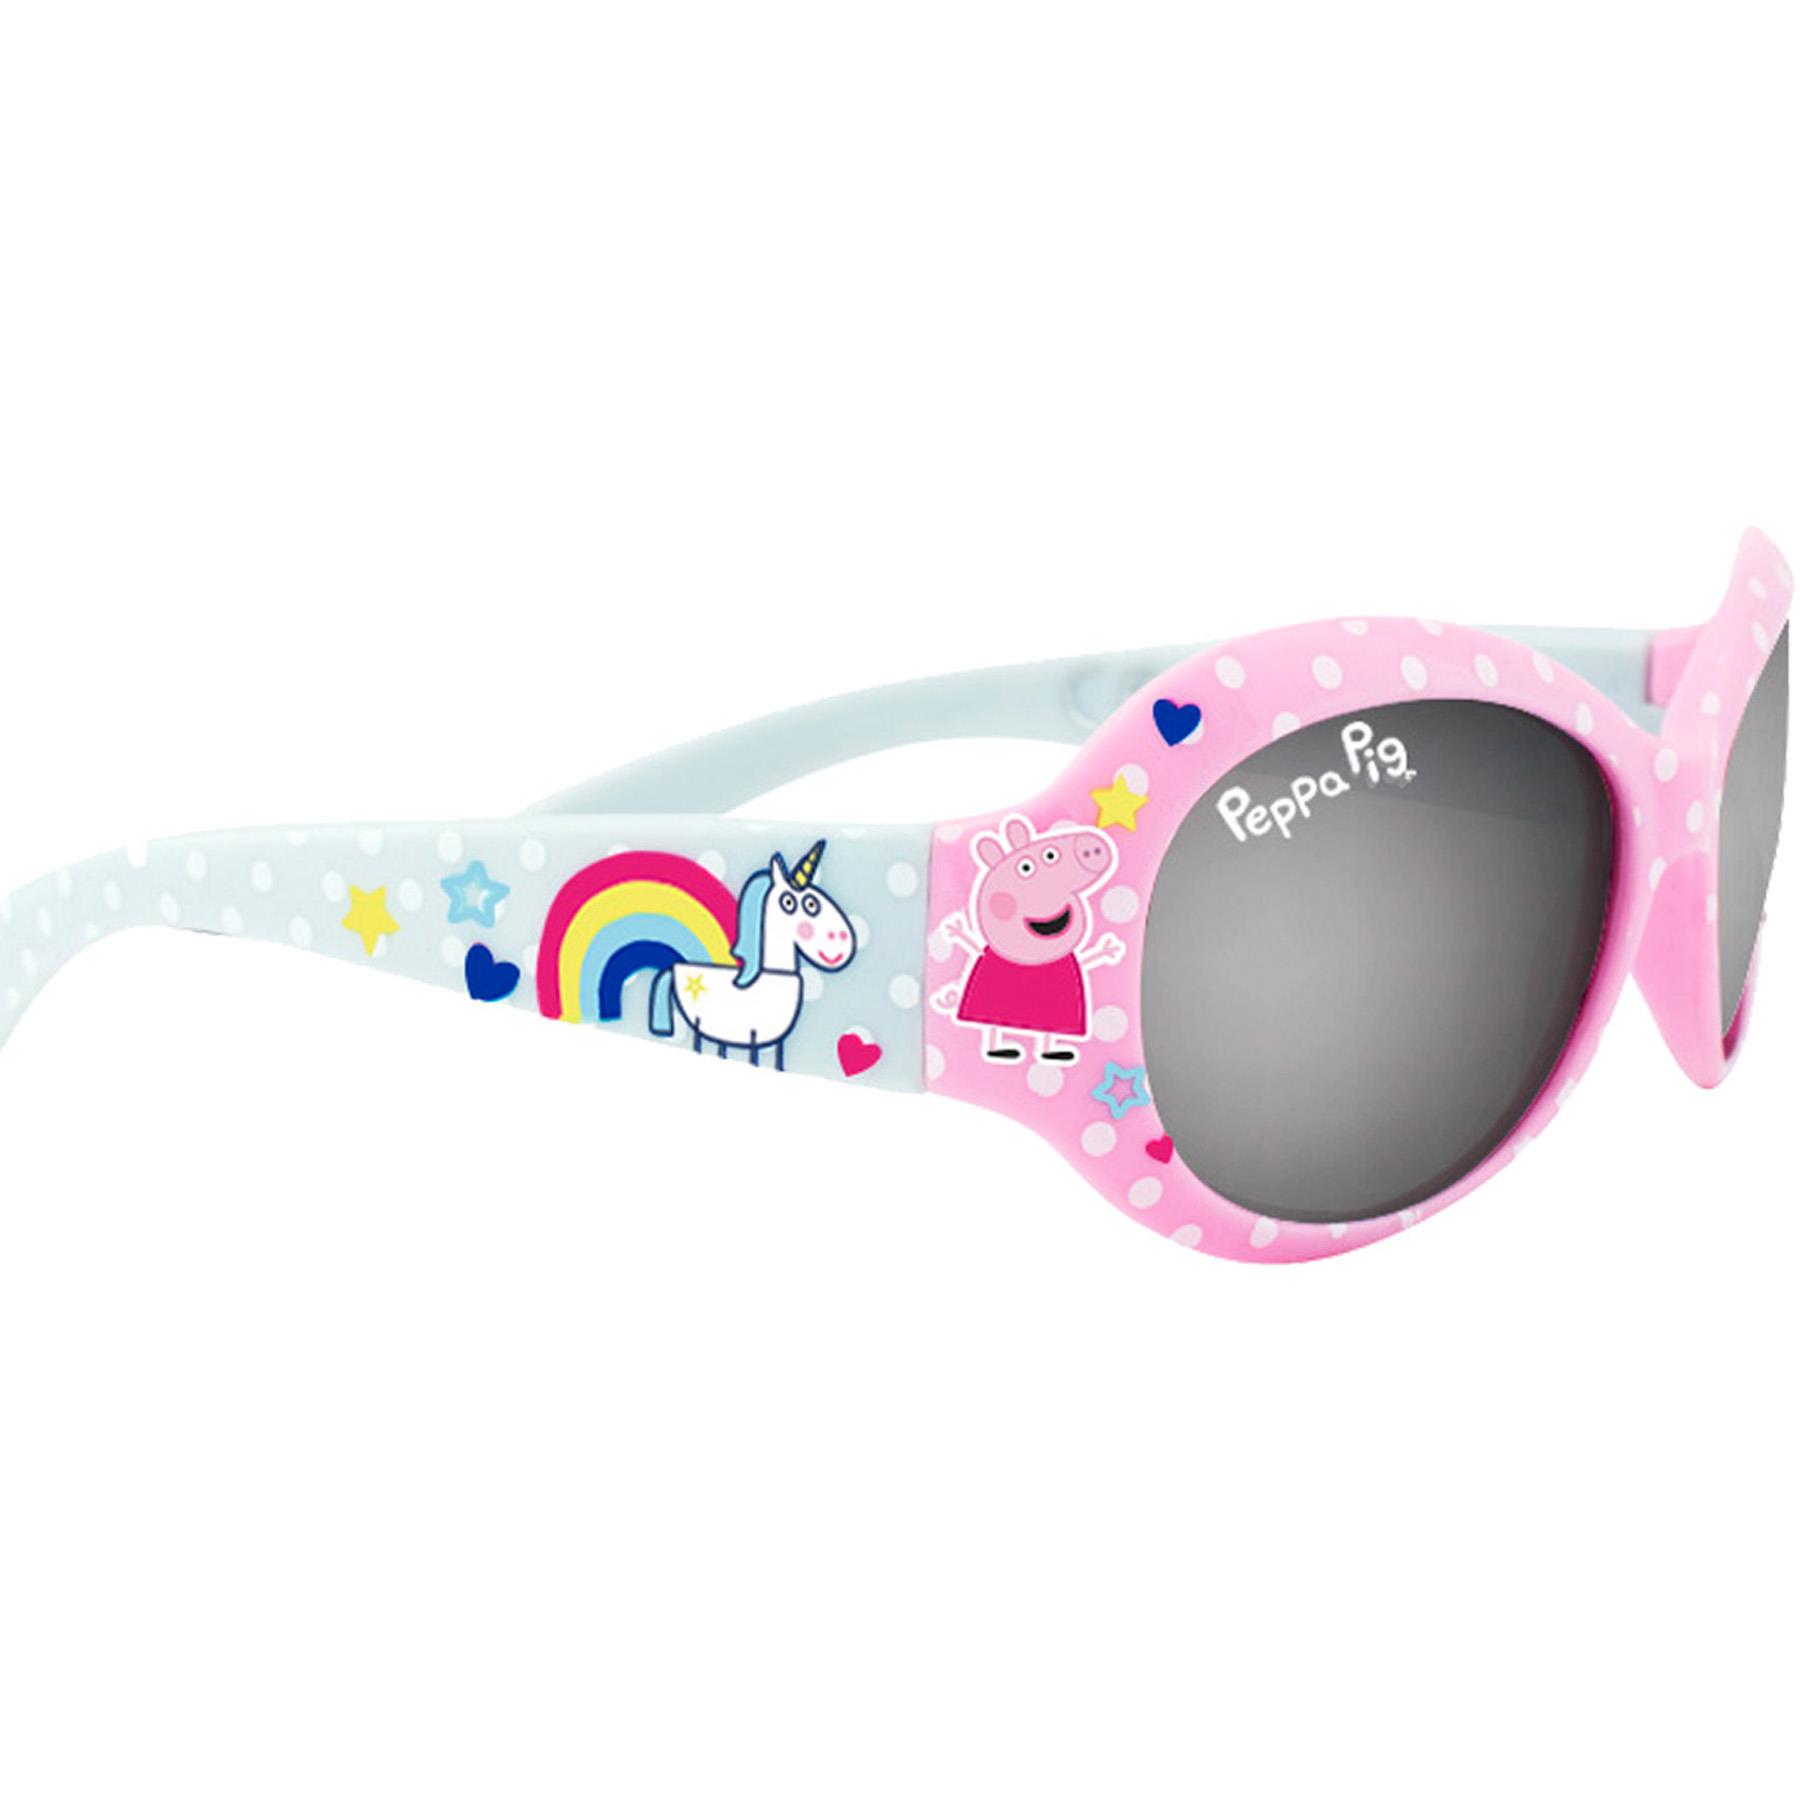 Peppa Pig Children's Character Sunglasses UV protection for Holiday - PEPPA7